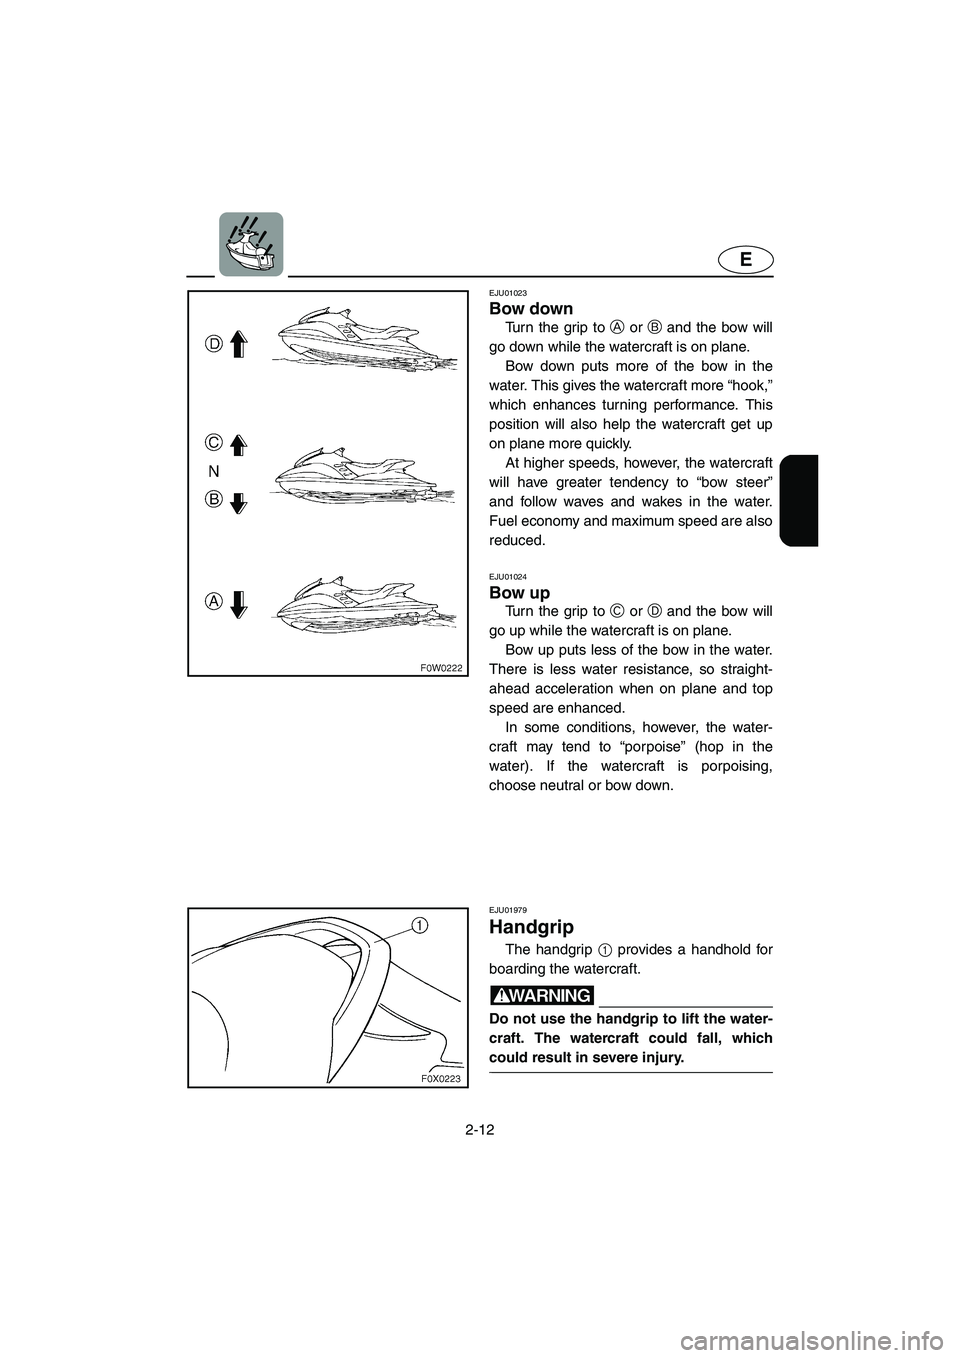 YAMAHA GP1200 2003  Owners Manual 2-12
E
EJU01023 
Bow down  
Turn the grip to A or B and the bow will
go down while the watercraft is on plane. 
Bow down puts more of the bow in the
water. This gives the watercraft more “hook,”
w